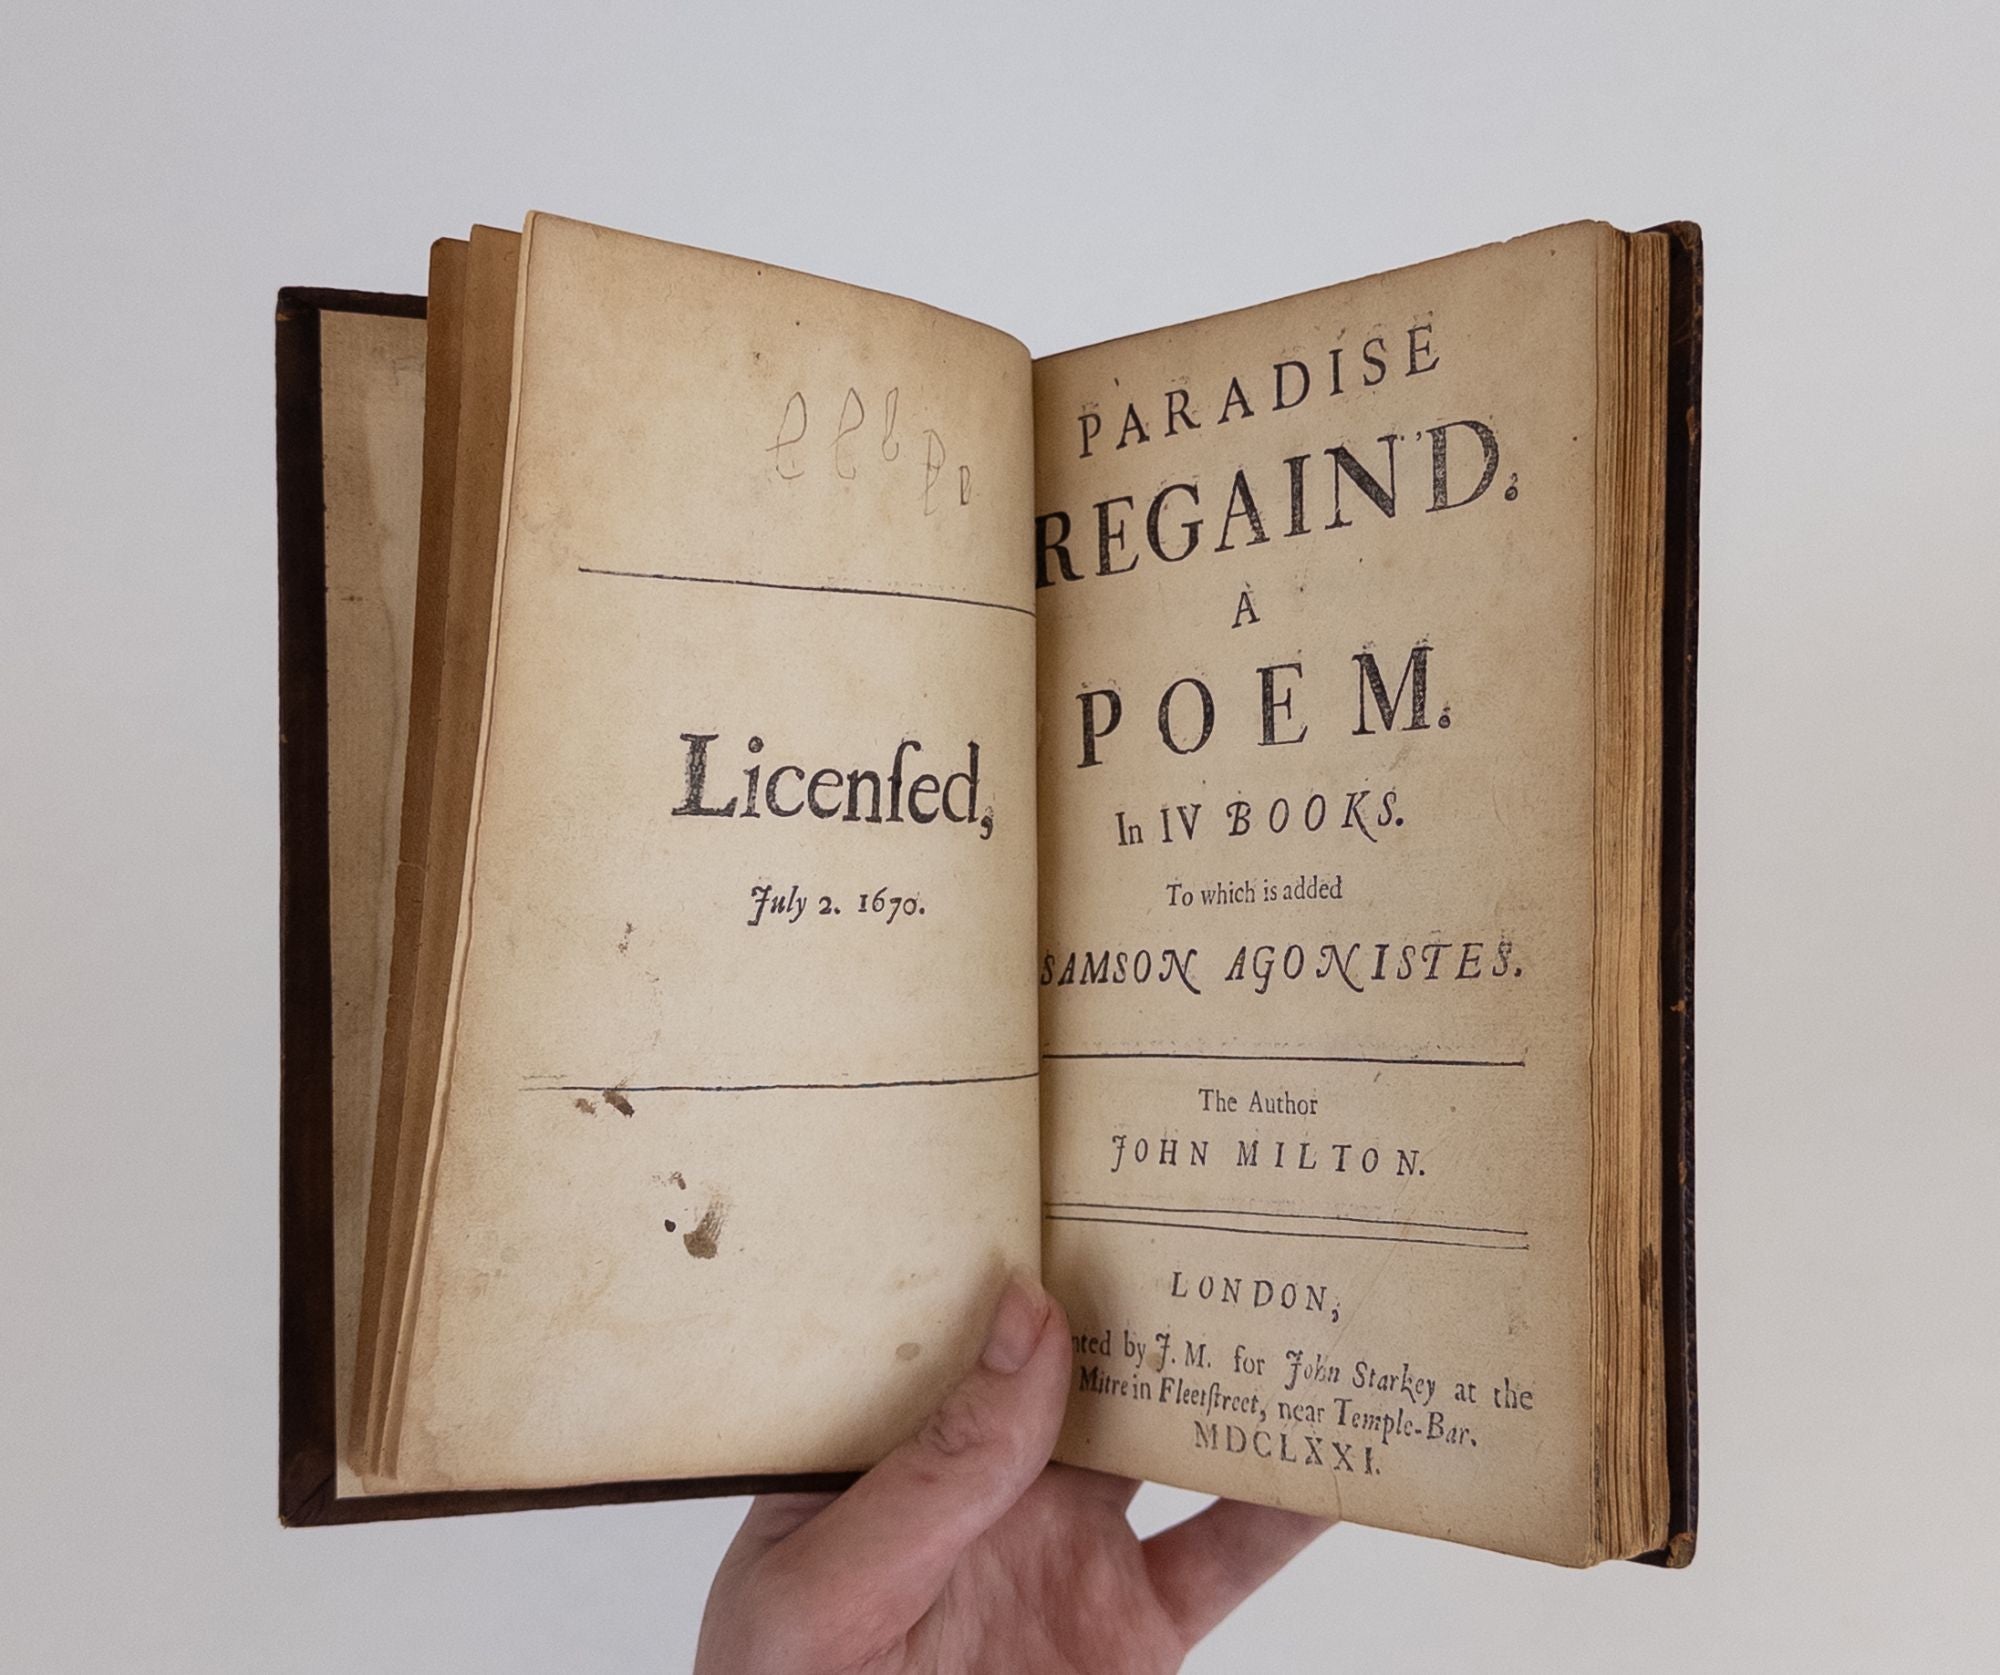 Product Image for PARADISE REGAIN'D. A POEM IN IV BOOKS. TO WHICH IS ADDED SAMSON AGONISTES